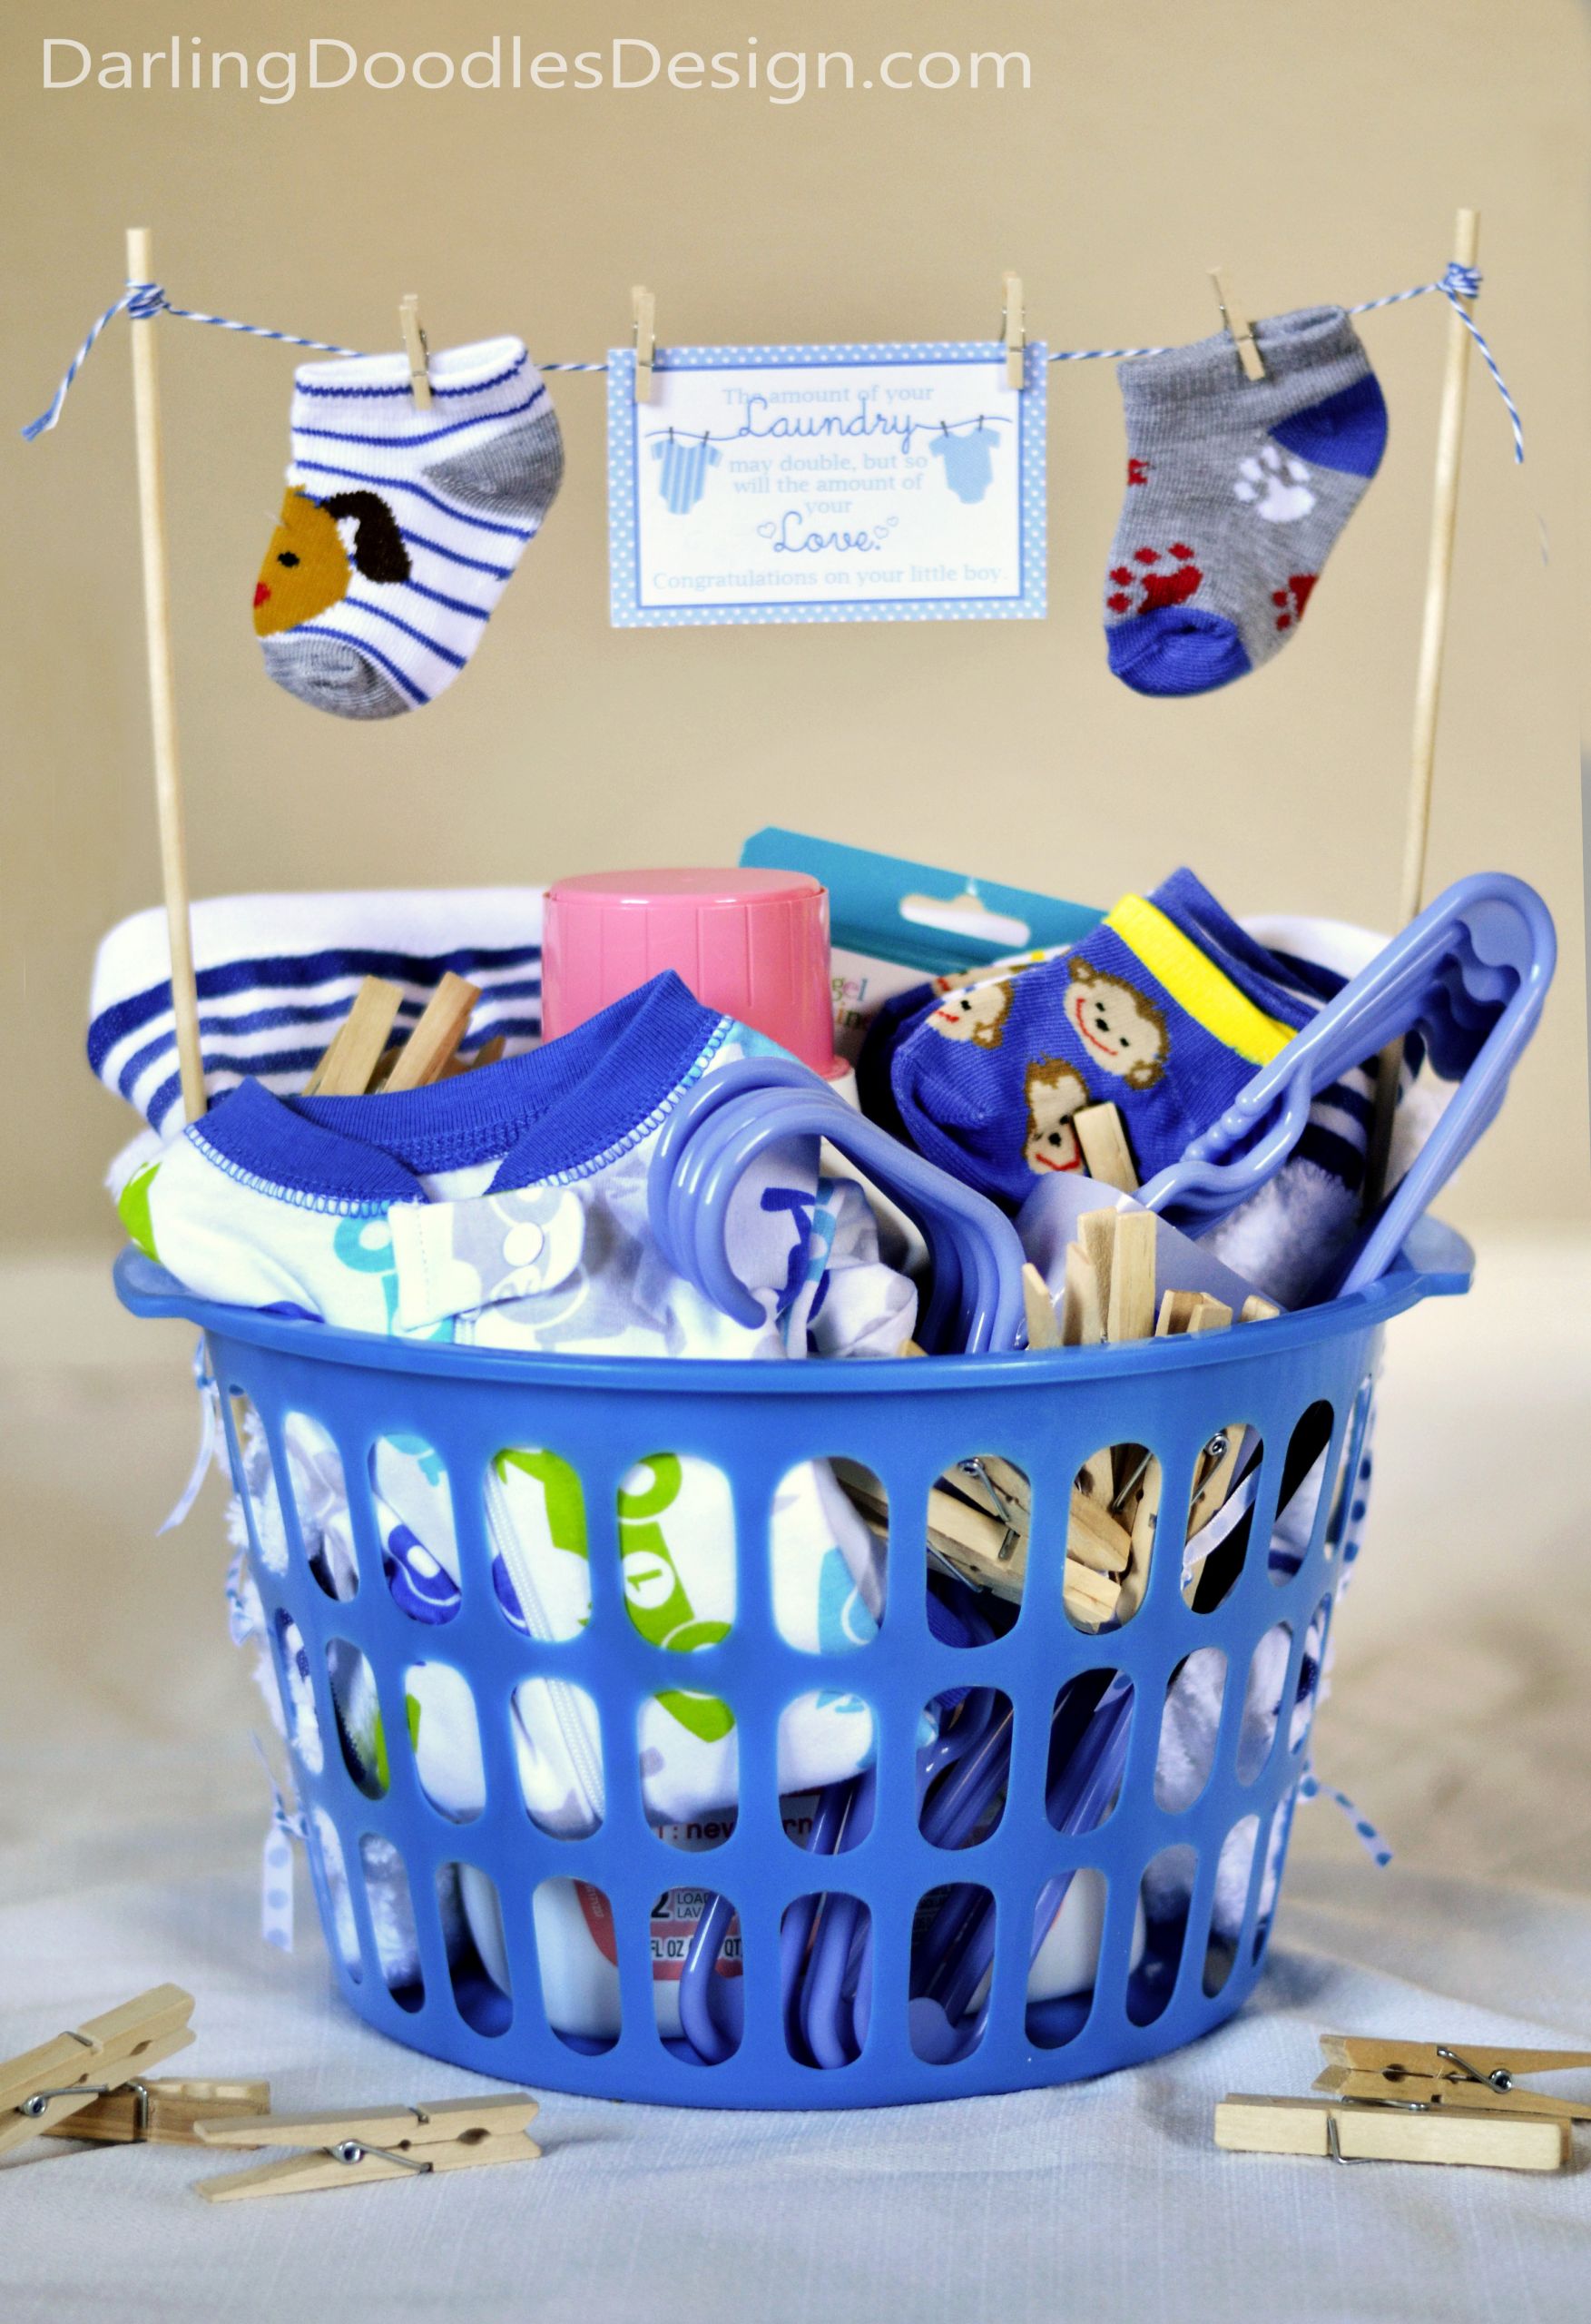 Baby Shower Gift Basket Ideas For Boy
 Loads of Love and Laundry Darling Doodles